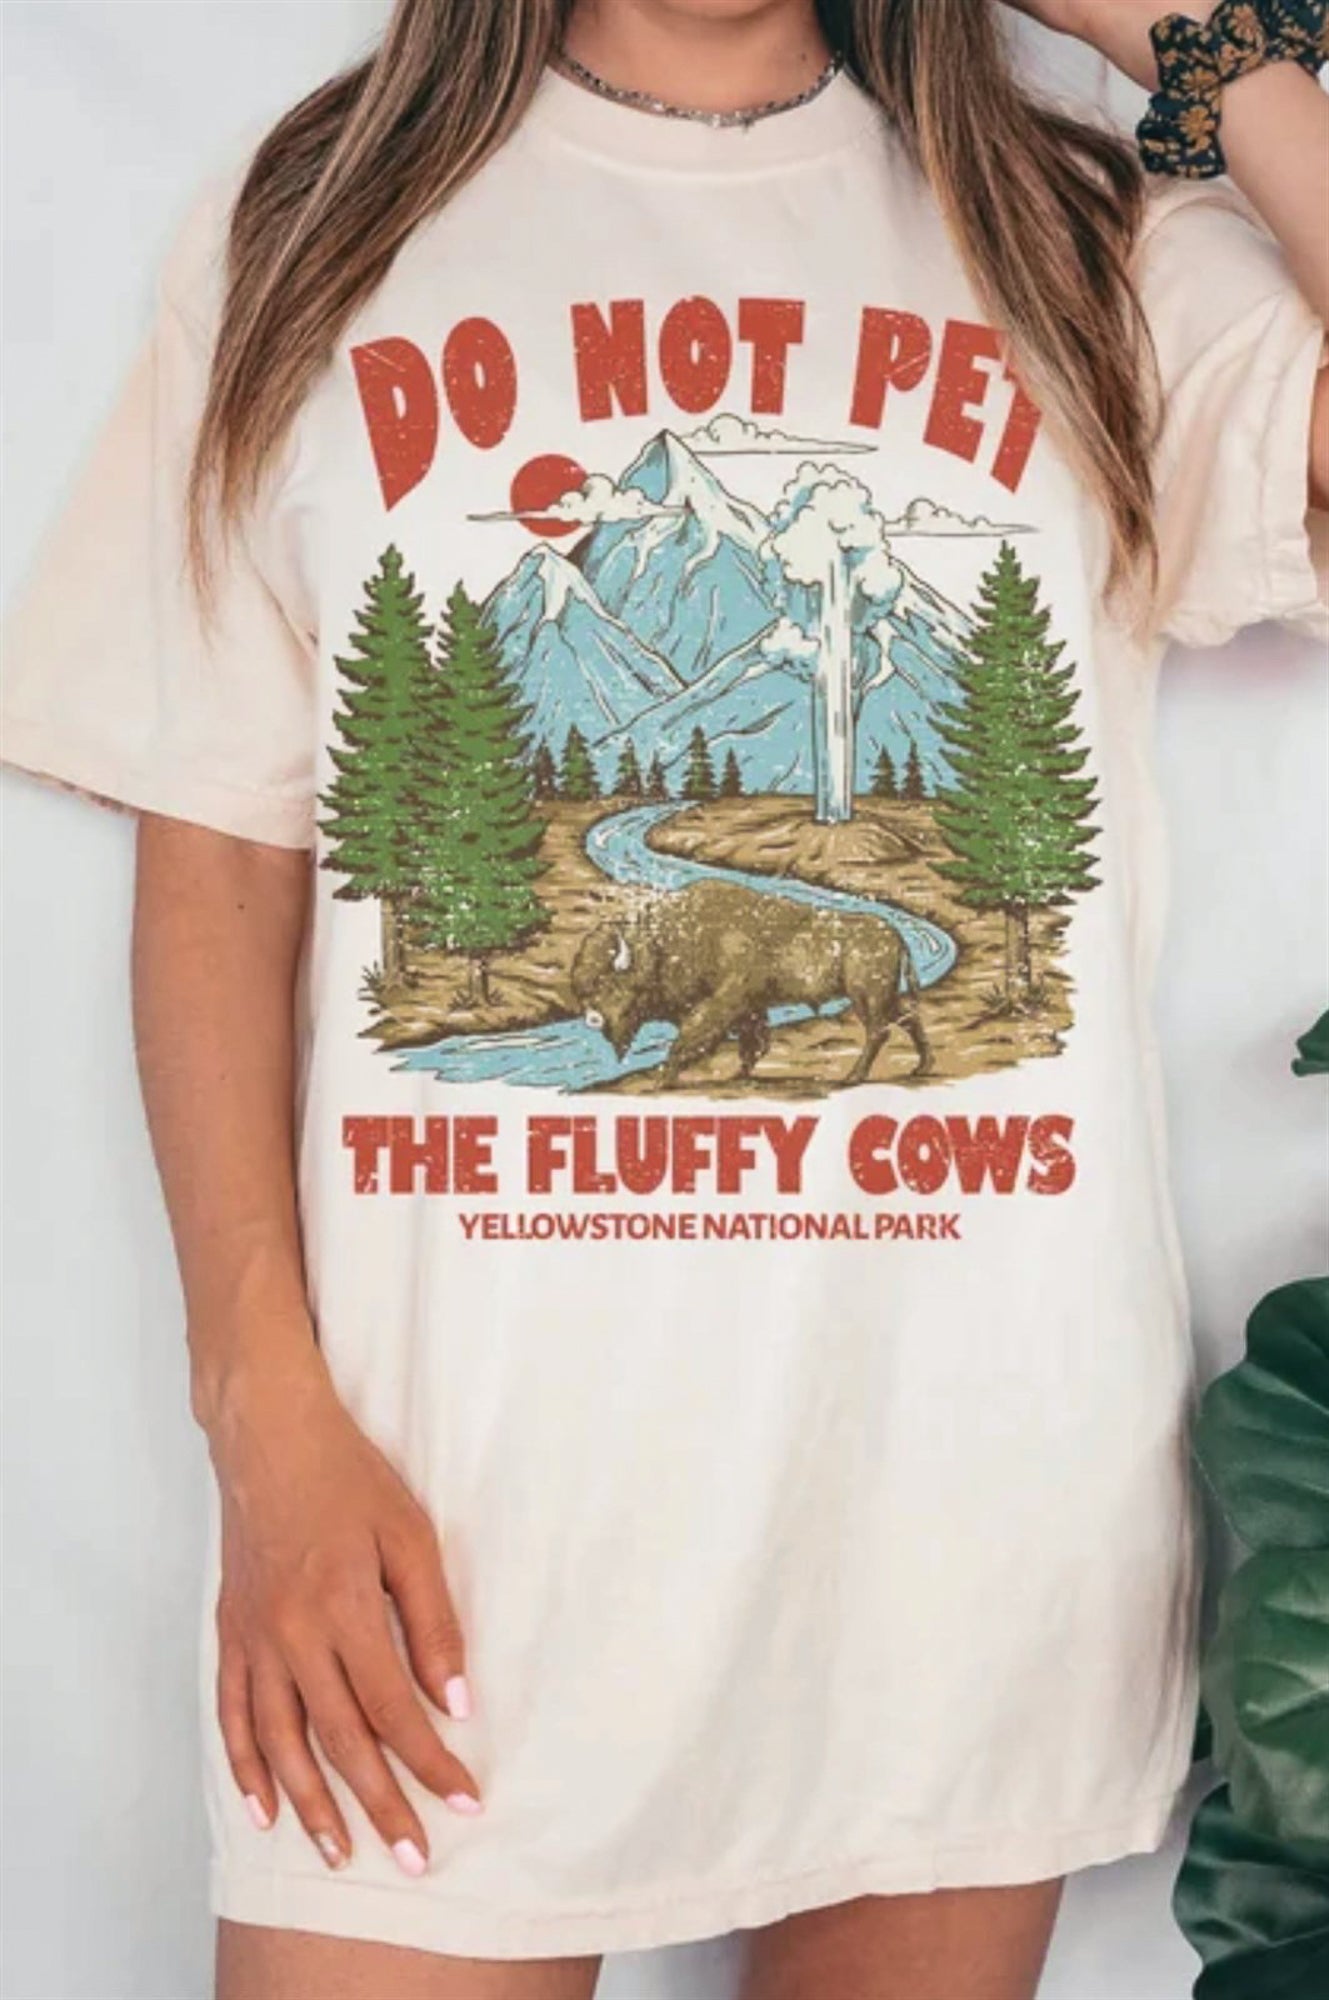 *Do Not Pet The Fluffy Cows Yellowstone T-Shirt or Crew Sweatshirt